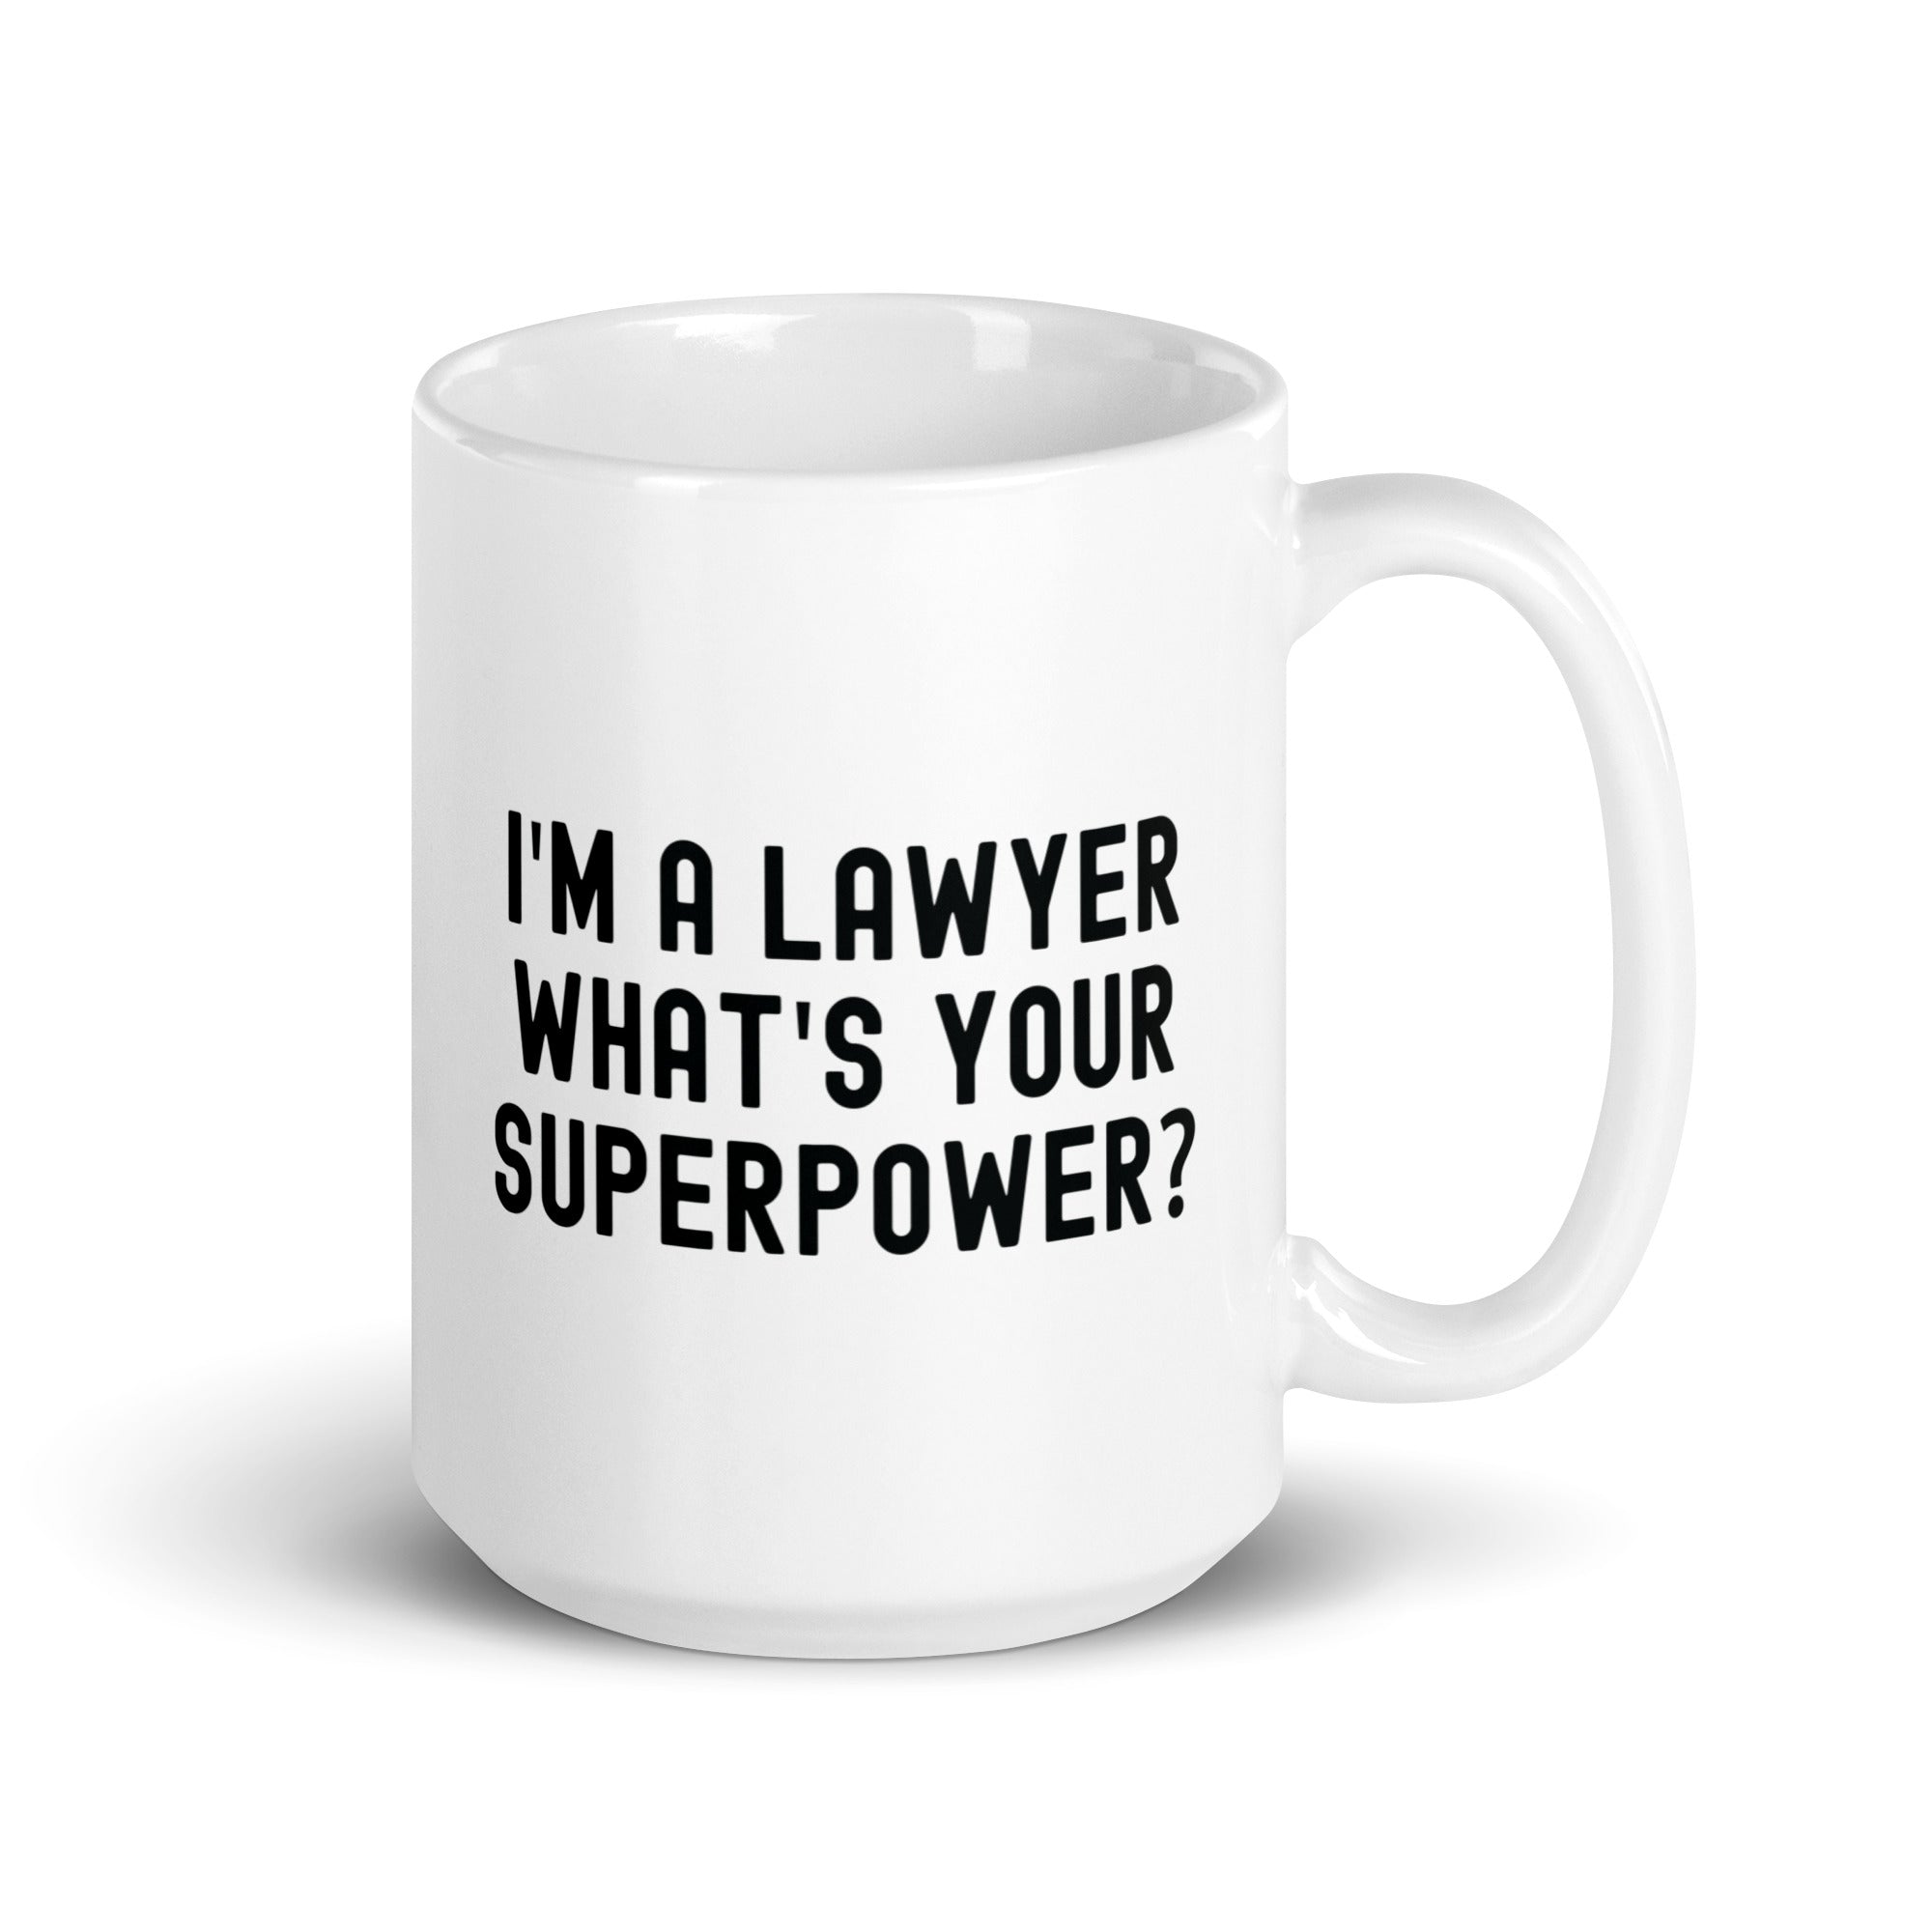 White glossy mug | I'm a lawyer, what's your superpower?